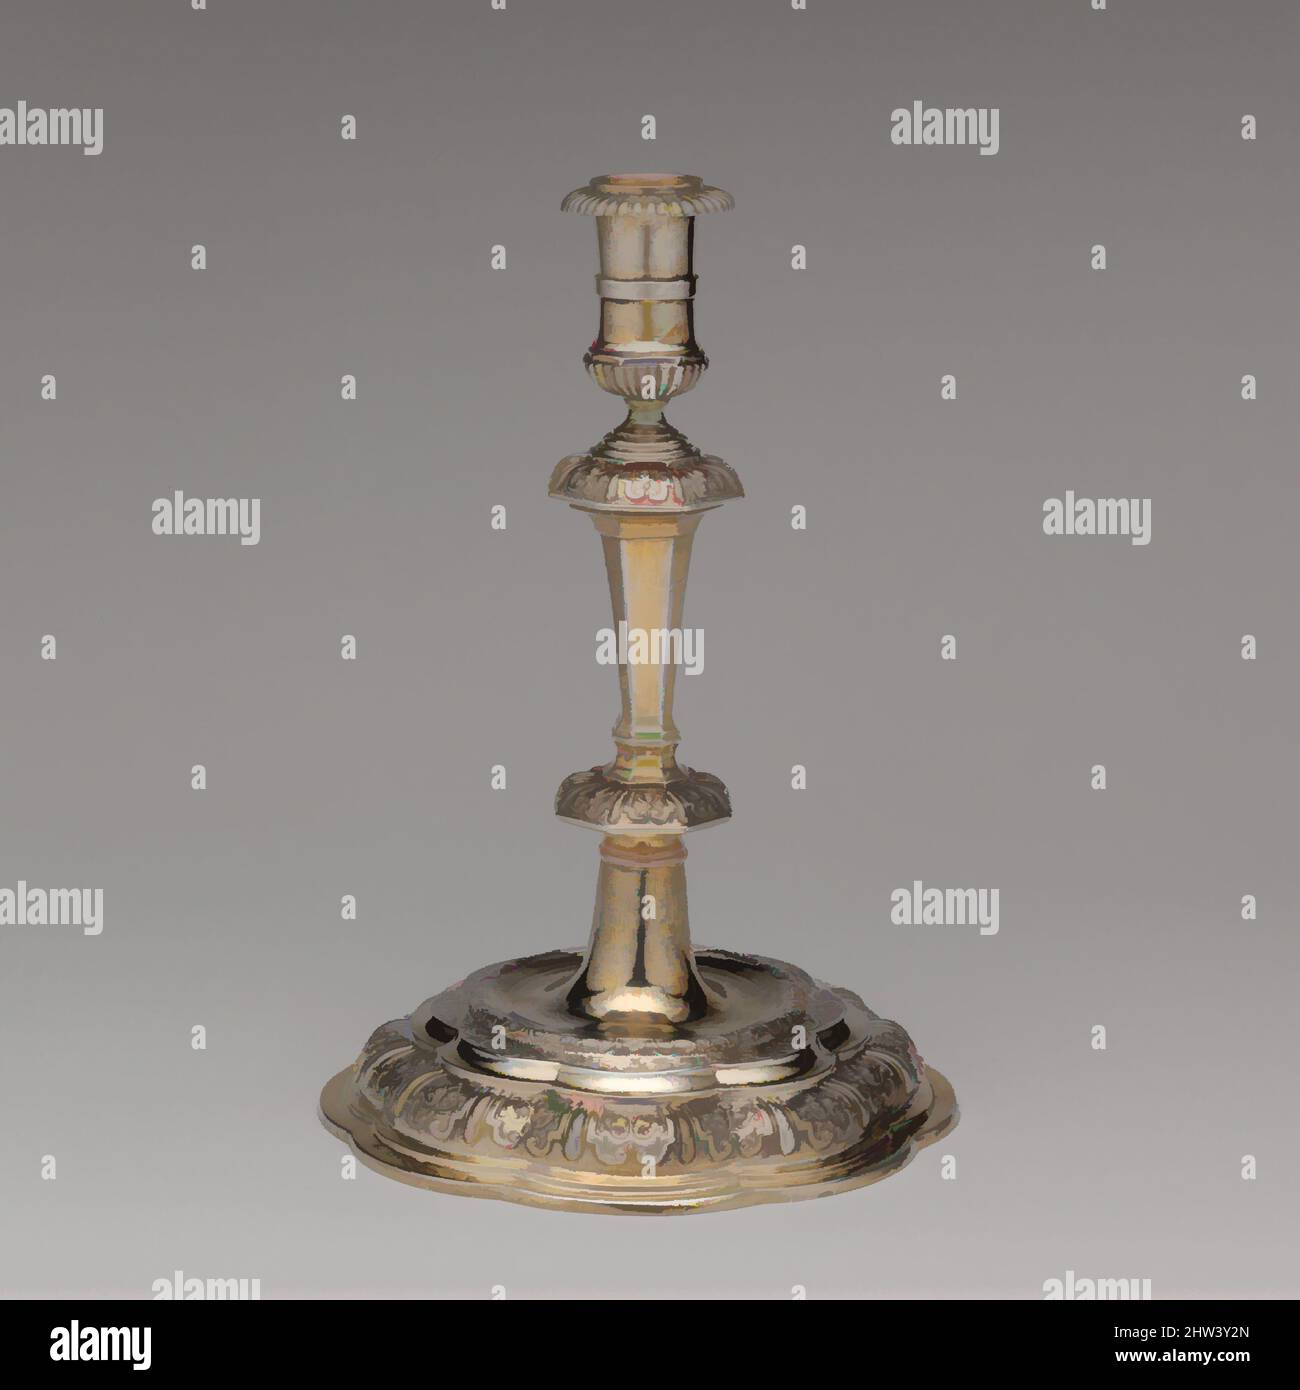 Art inspired by Candlestick (one of a pair), Master 'RW' (Swedish, Upsala, early 18th century), ca. 1710–20, Swedish, Uppsala, Silver, partially gilt, H. 8 1/2 in. (21.5 cm.); D. standing 5 3/4 in. (15 cm), Metalwork-Silver, Master 'RW' (Swedish, Upsala, early 18th century), Early-, Classic works modernized by Artotop with a splash of modernity. Shapes, color and value, eye-catching visual impact on art. Emotions through freedom of artworks in a contemporary way. A timeless message pursuing a wildly creative new direction. Artists turning to the digital medium and creating the Artotop NFT Stock Photo